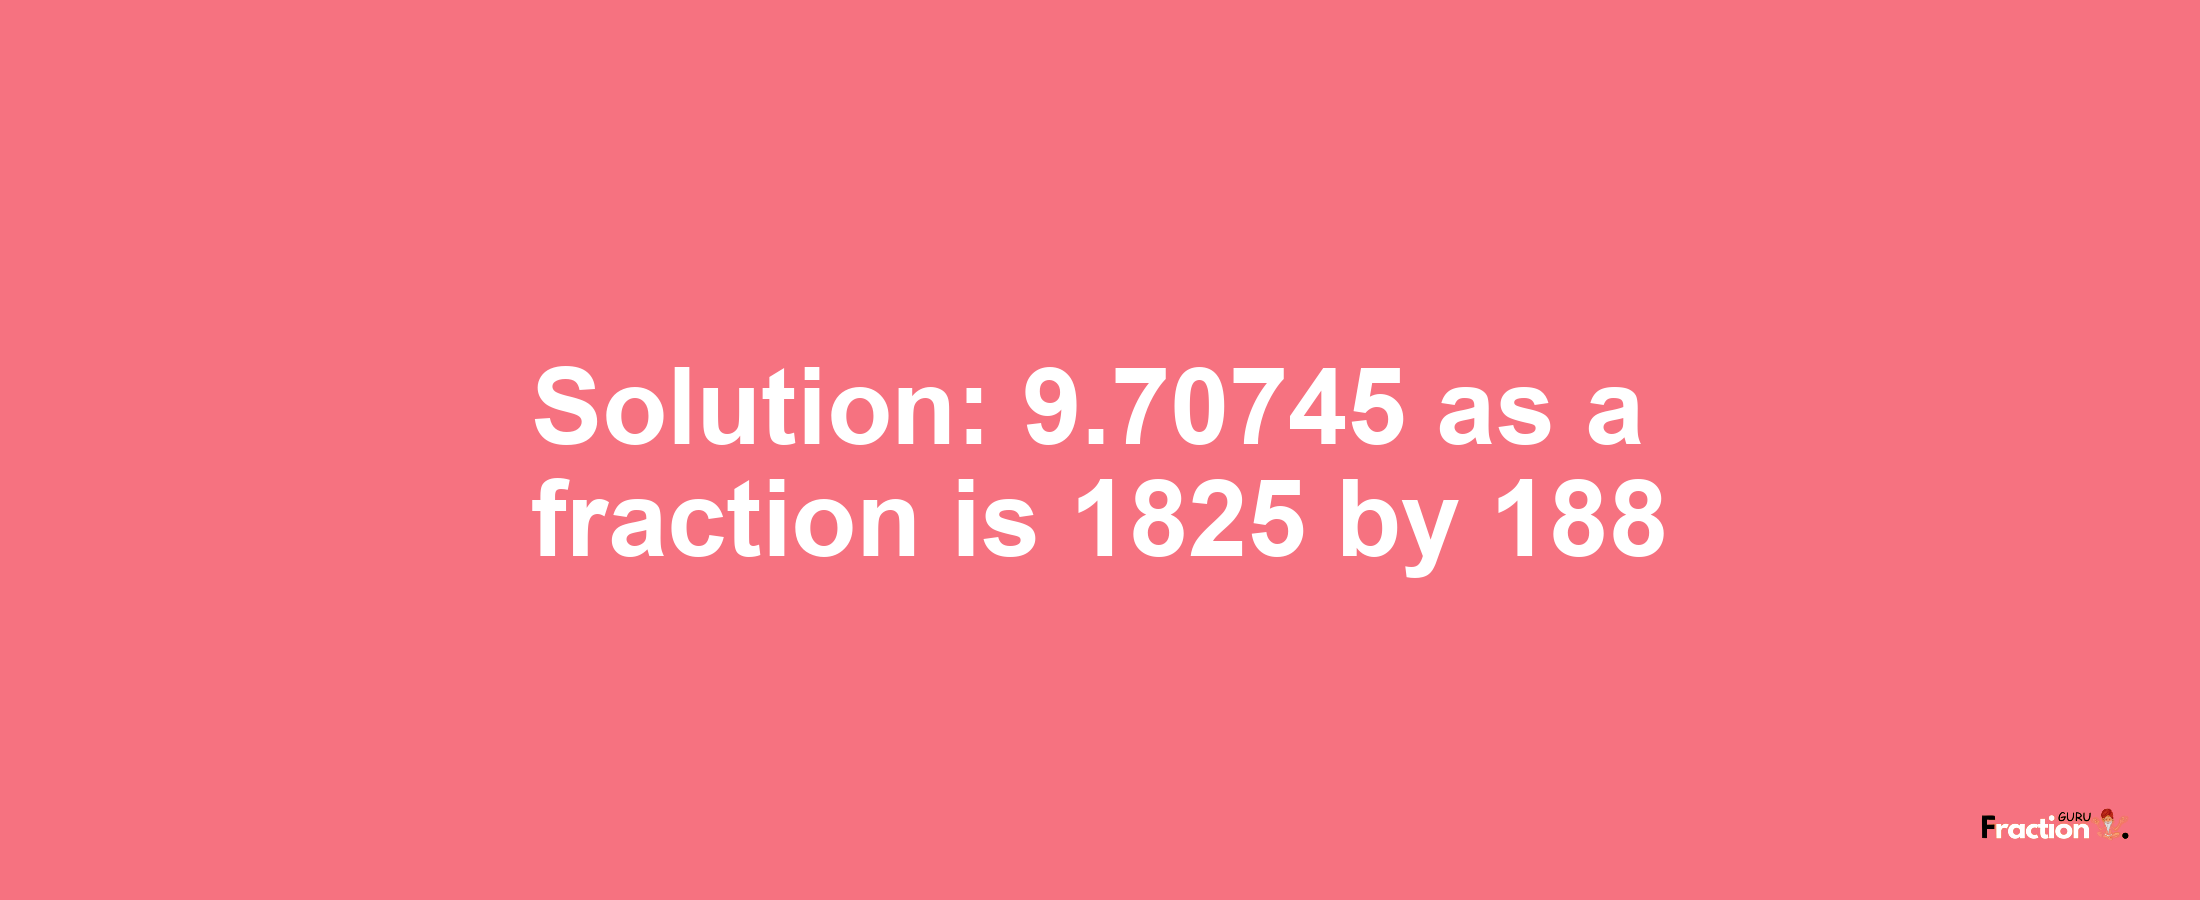 Solution:9.70745 as a fraction is 1825/188